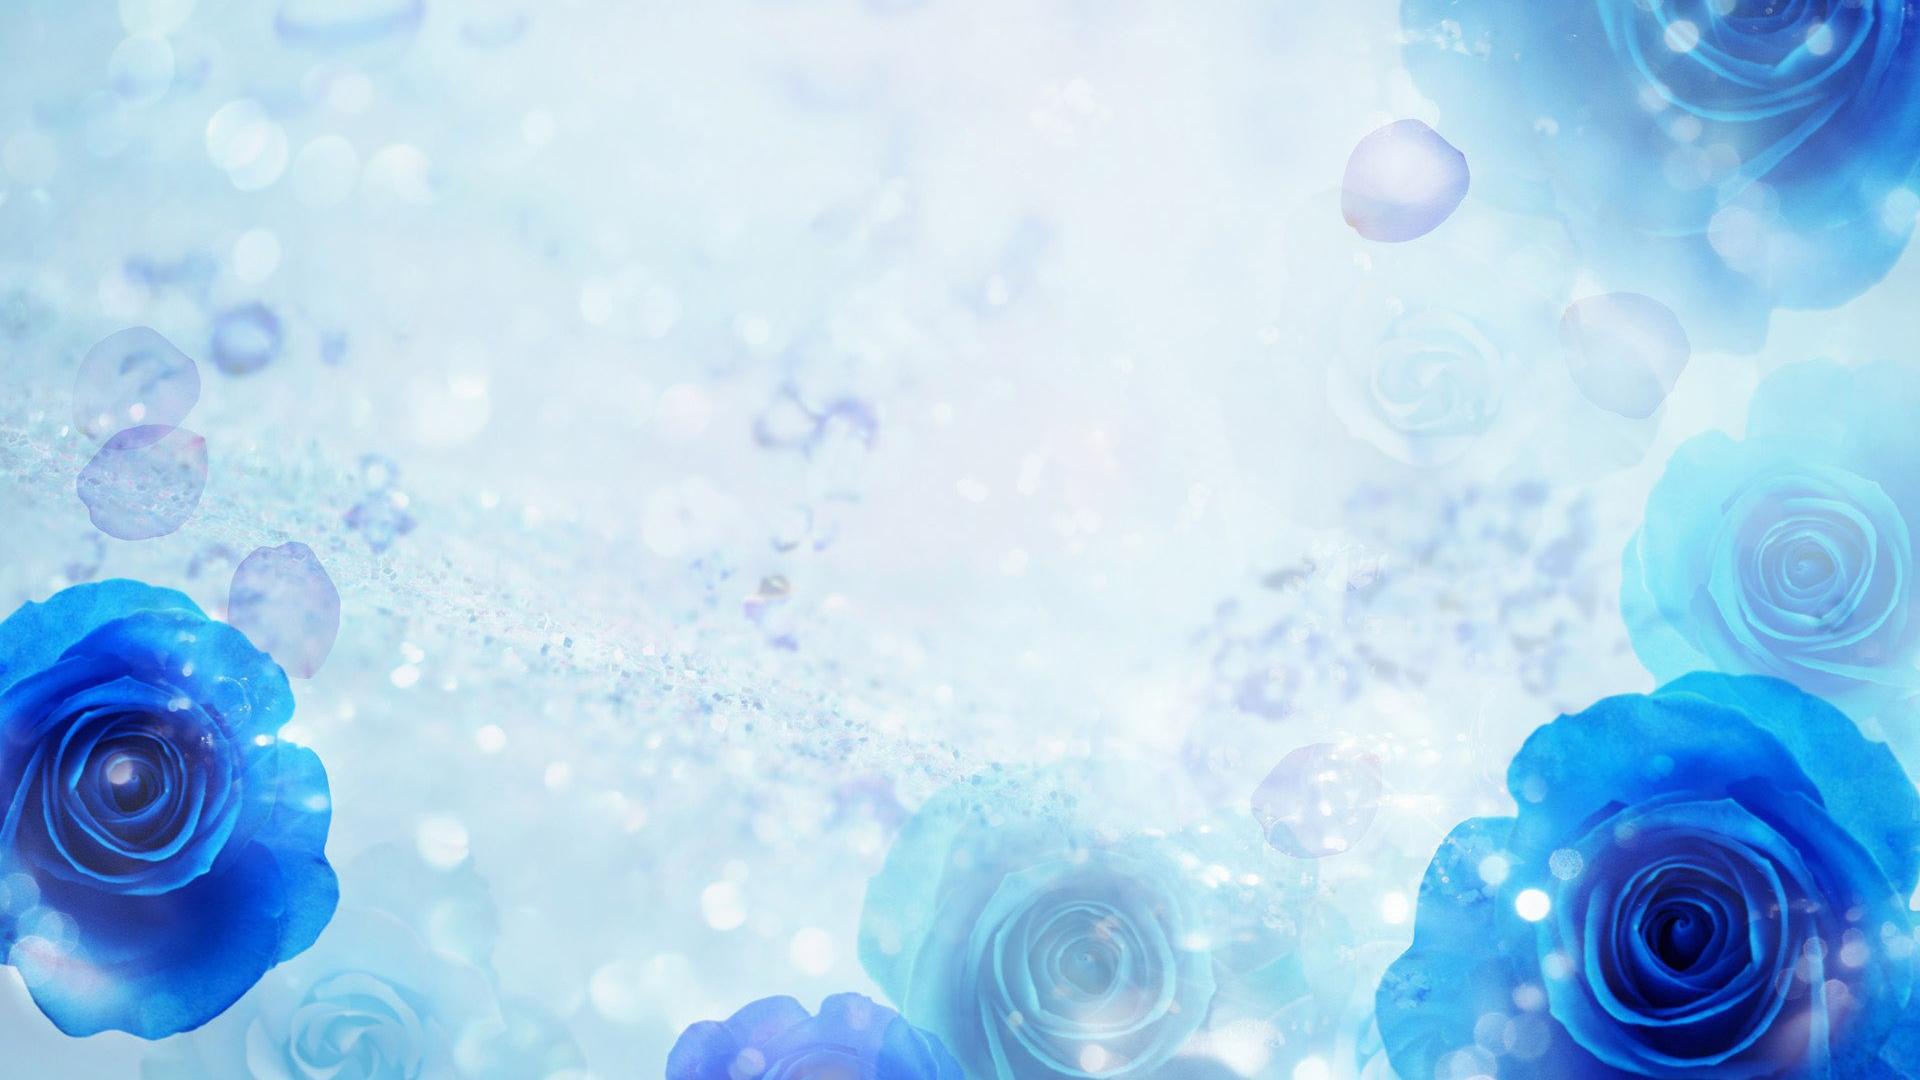 Blue roses on a blue background wallpapers and images - wallpapers